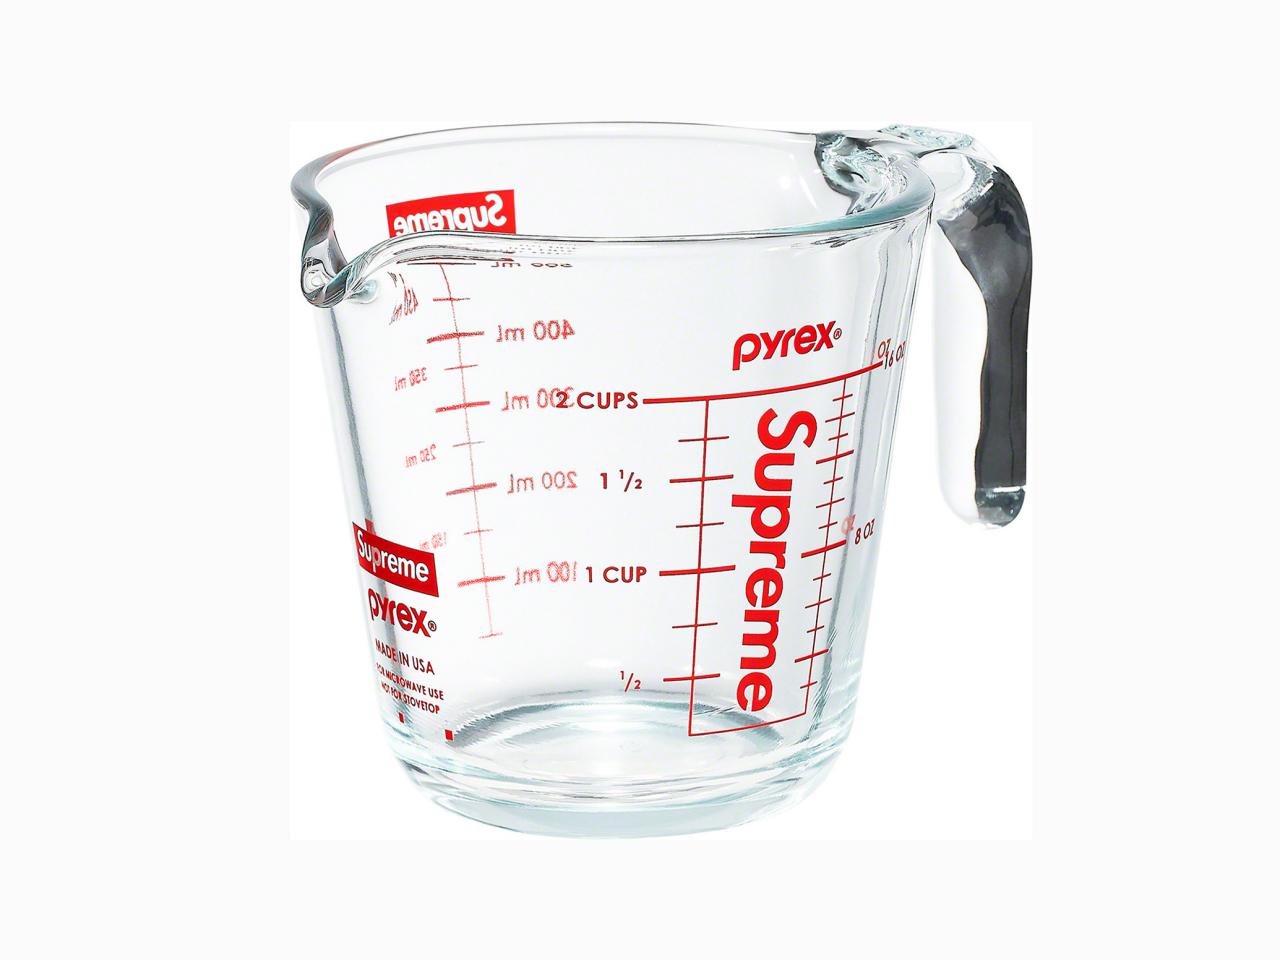 https://food.fnr.sndimg.com/content/dam/images/food/products/2019/8/22/rx_supreme-pyrex-cup.jpg.rend.hgtvcom.1280.960.suffix/1566493089313.jpeg